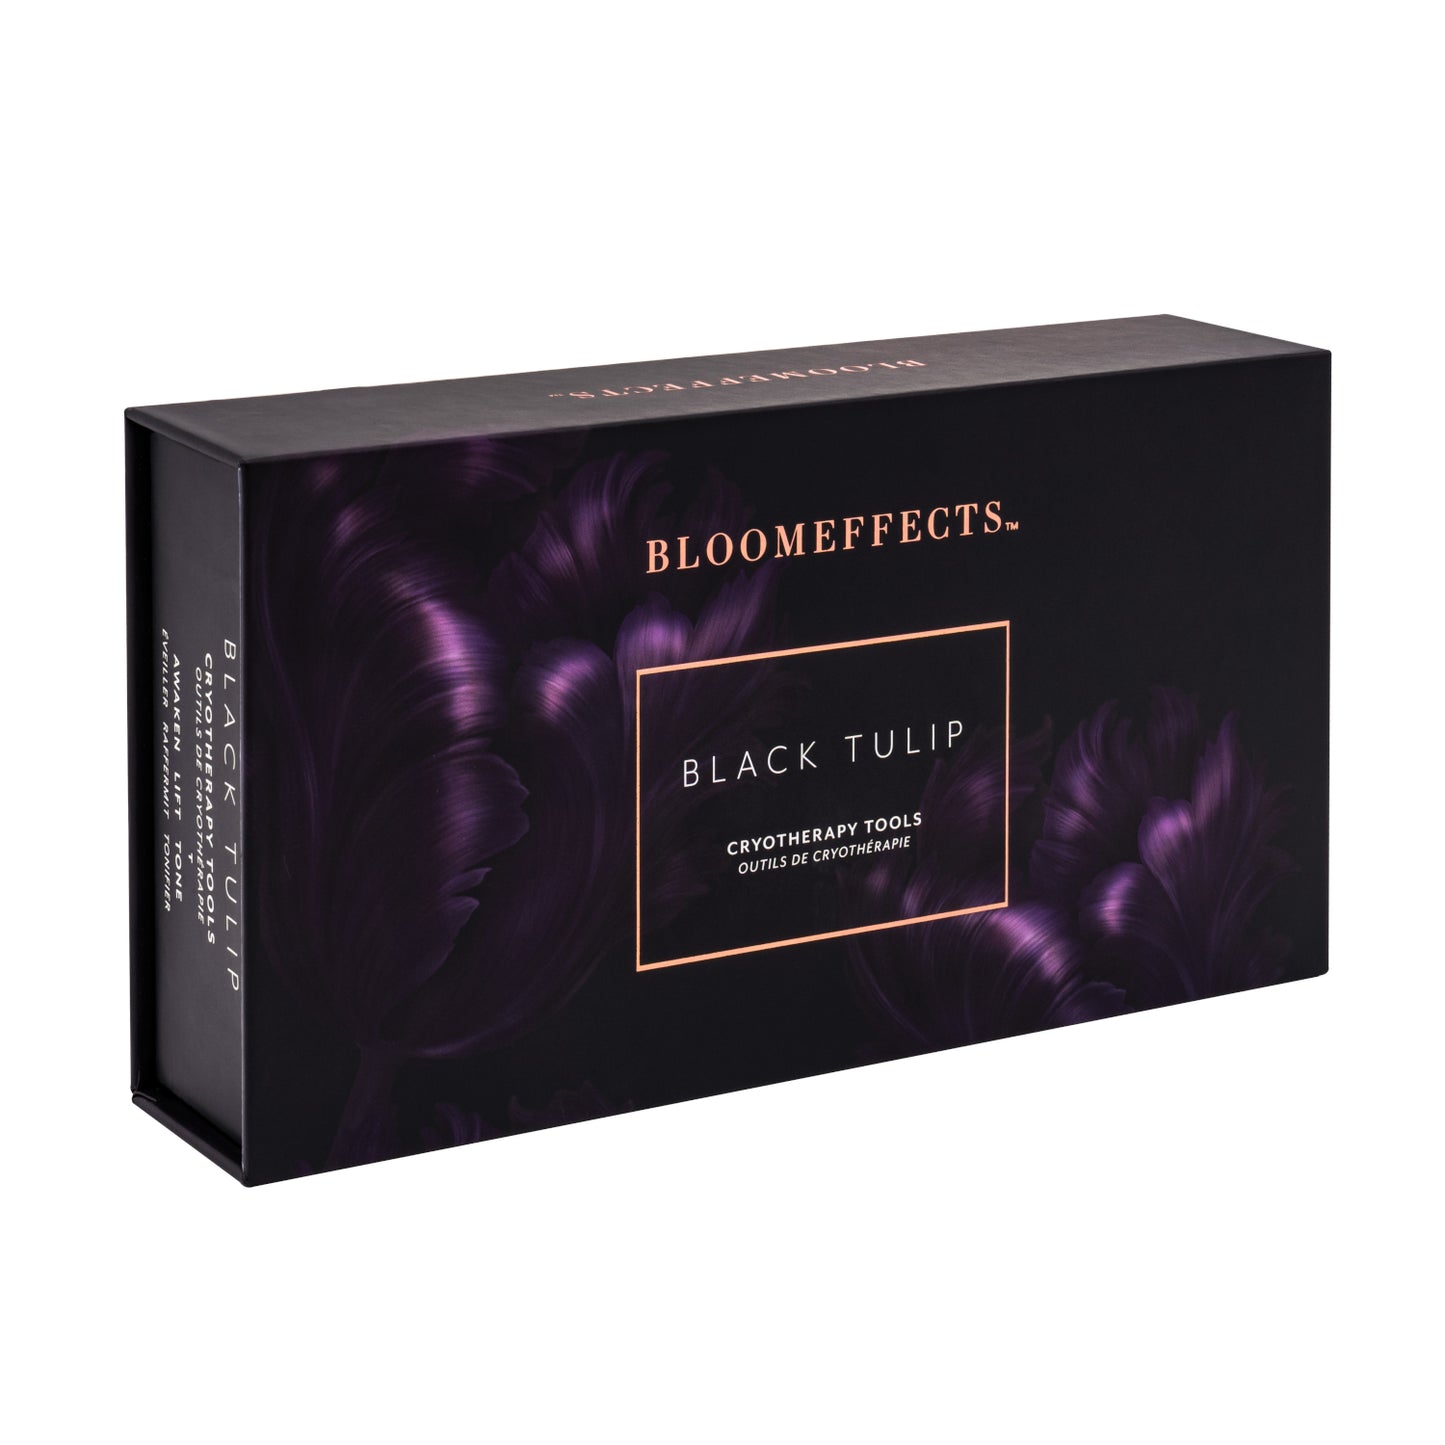 BLOOMEFFECTS Black Tulip Cryotherapy Tools